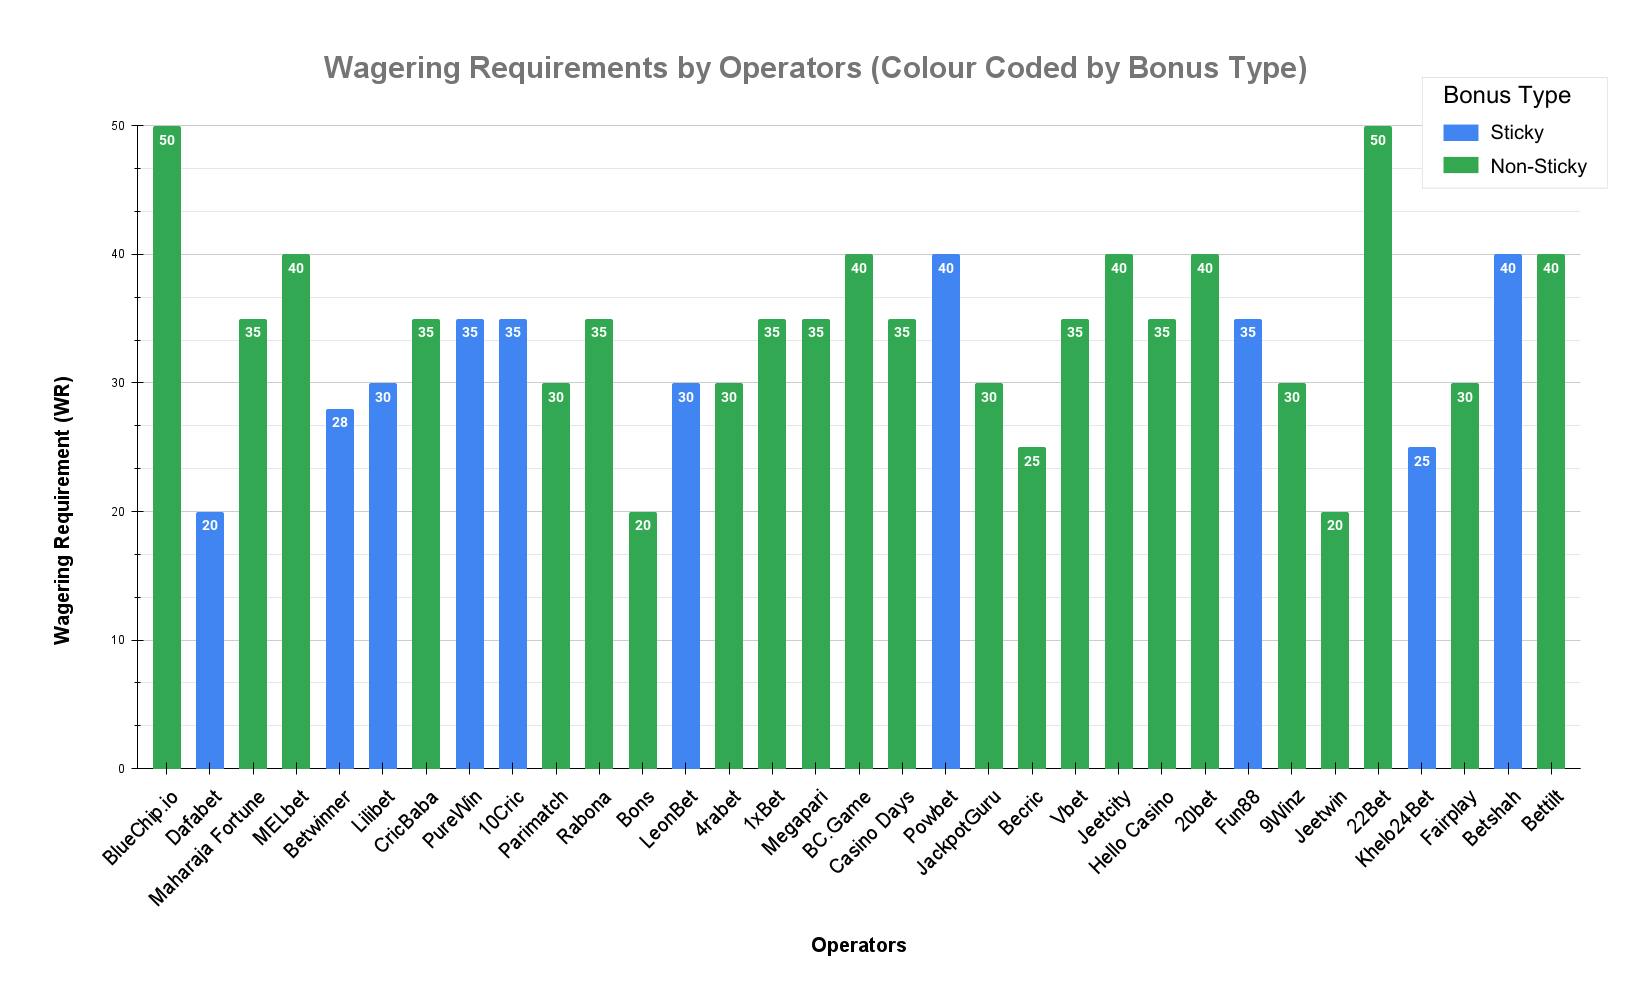 Wagering Requirements by Operators